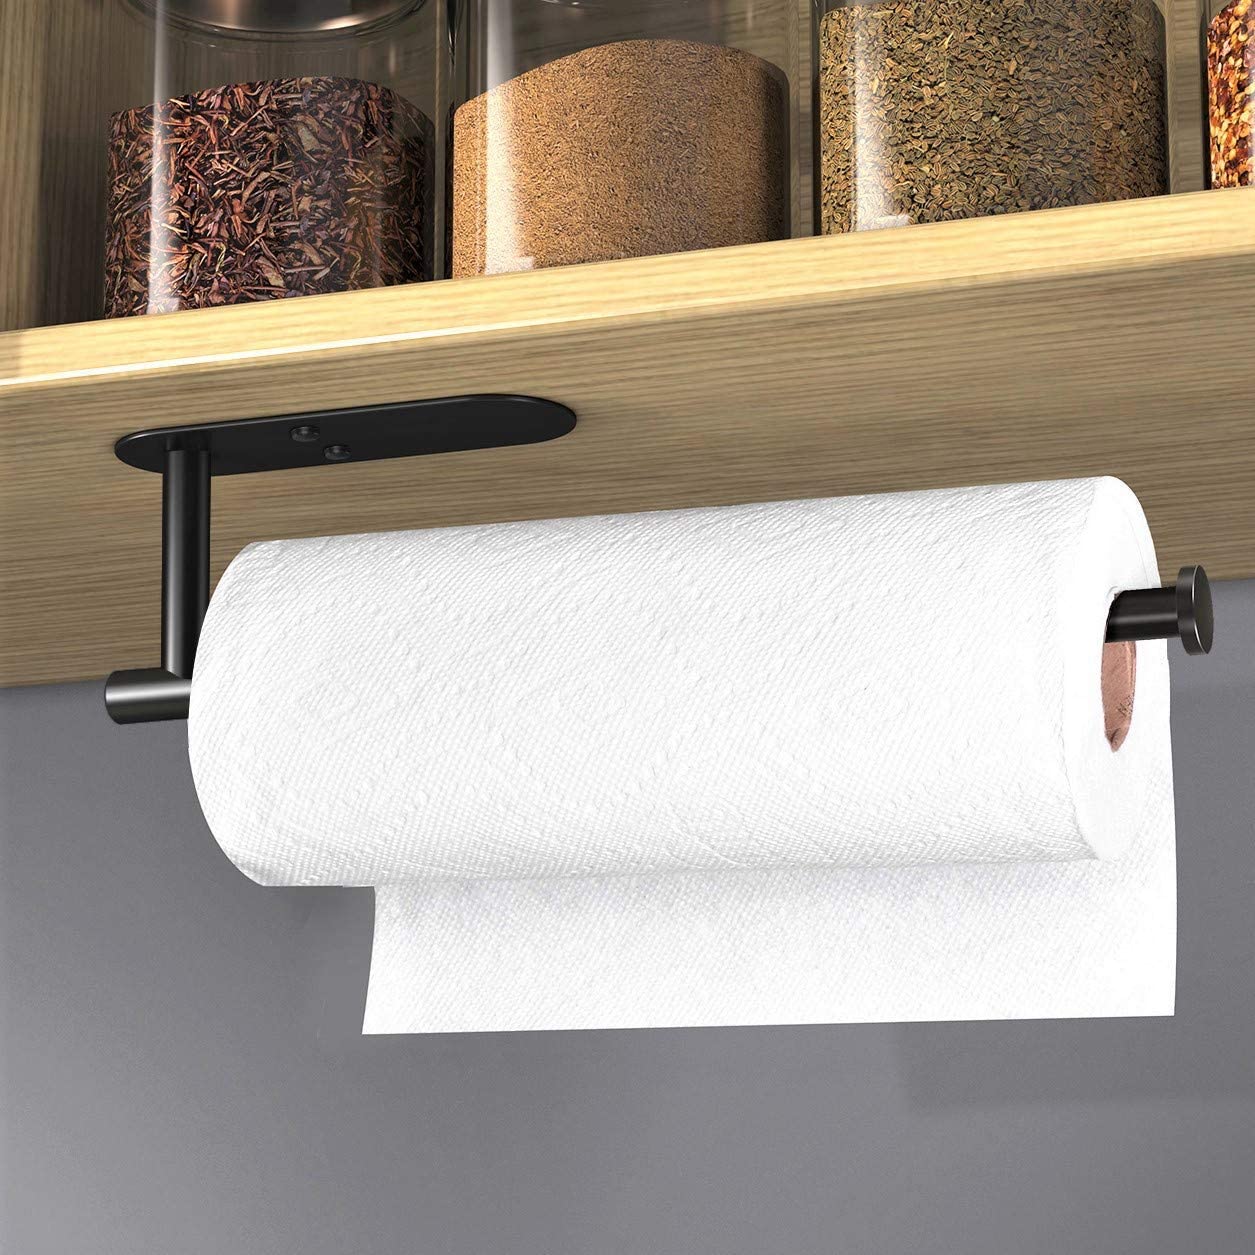 https://www.mykitchenfirst.com/wp-content/uploads/2023/03/paper-towel-holder-stainless-steel-under-cabinet-adhesive-screw-features.jpg